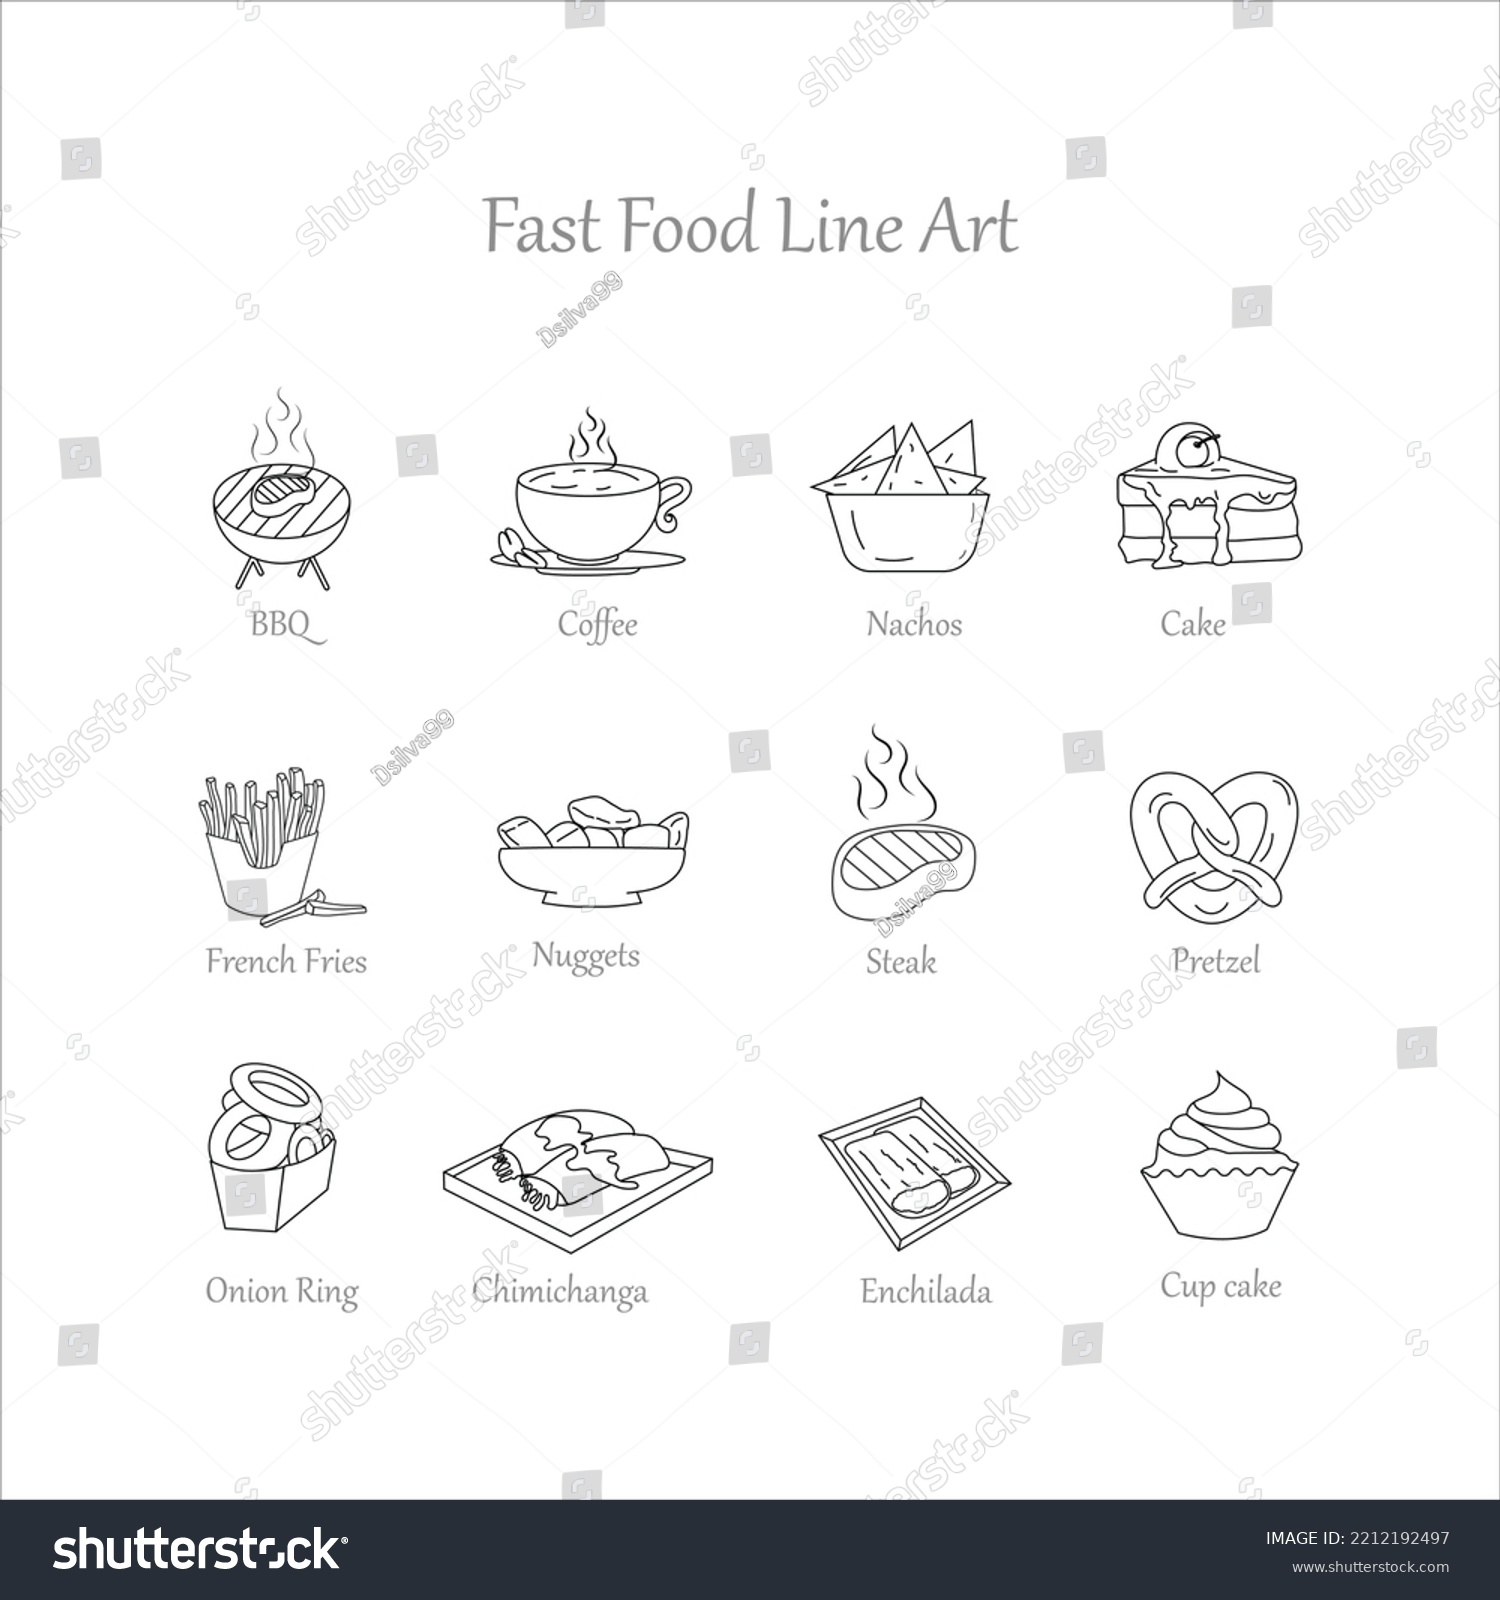 SVG of BBQ, Coffee, Nachos, Cake, French Fries, Nuggets, Steak, Pretzel, Onion Ring, Chimichanga, Enchilada, Cup cake delicious fast food and meal vector outline icon set with name tag svg